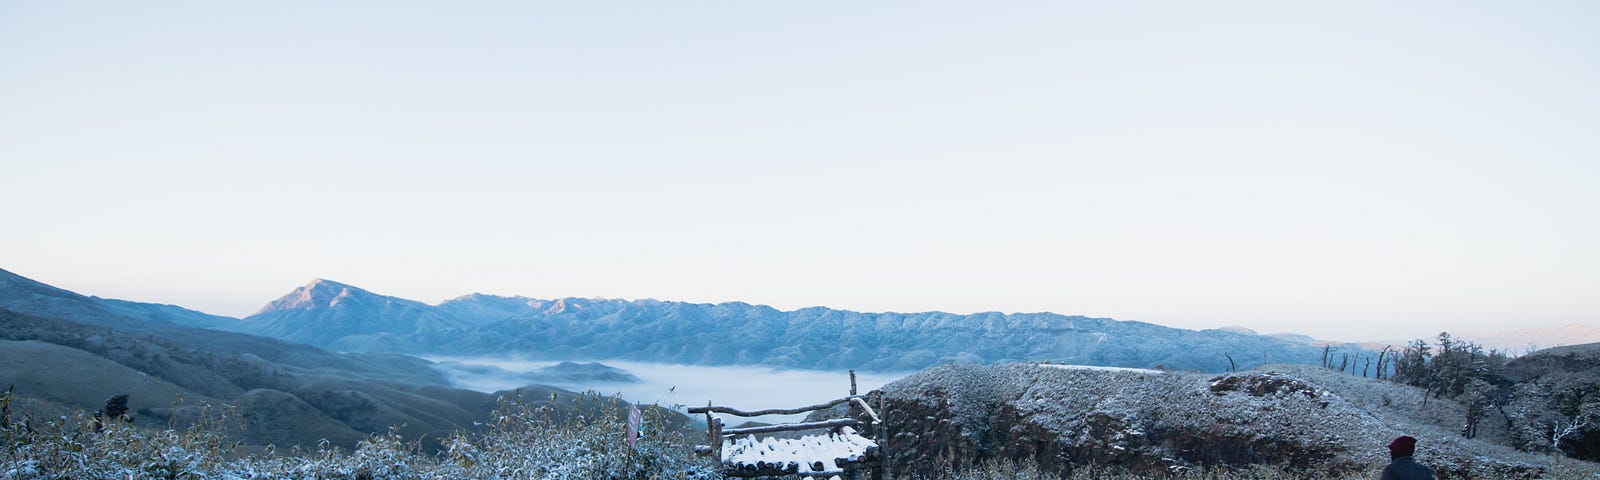 A range of mountains and a lake covered in snow. A small wooden bridge to cross. A person is sitting on a wooden plank.